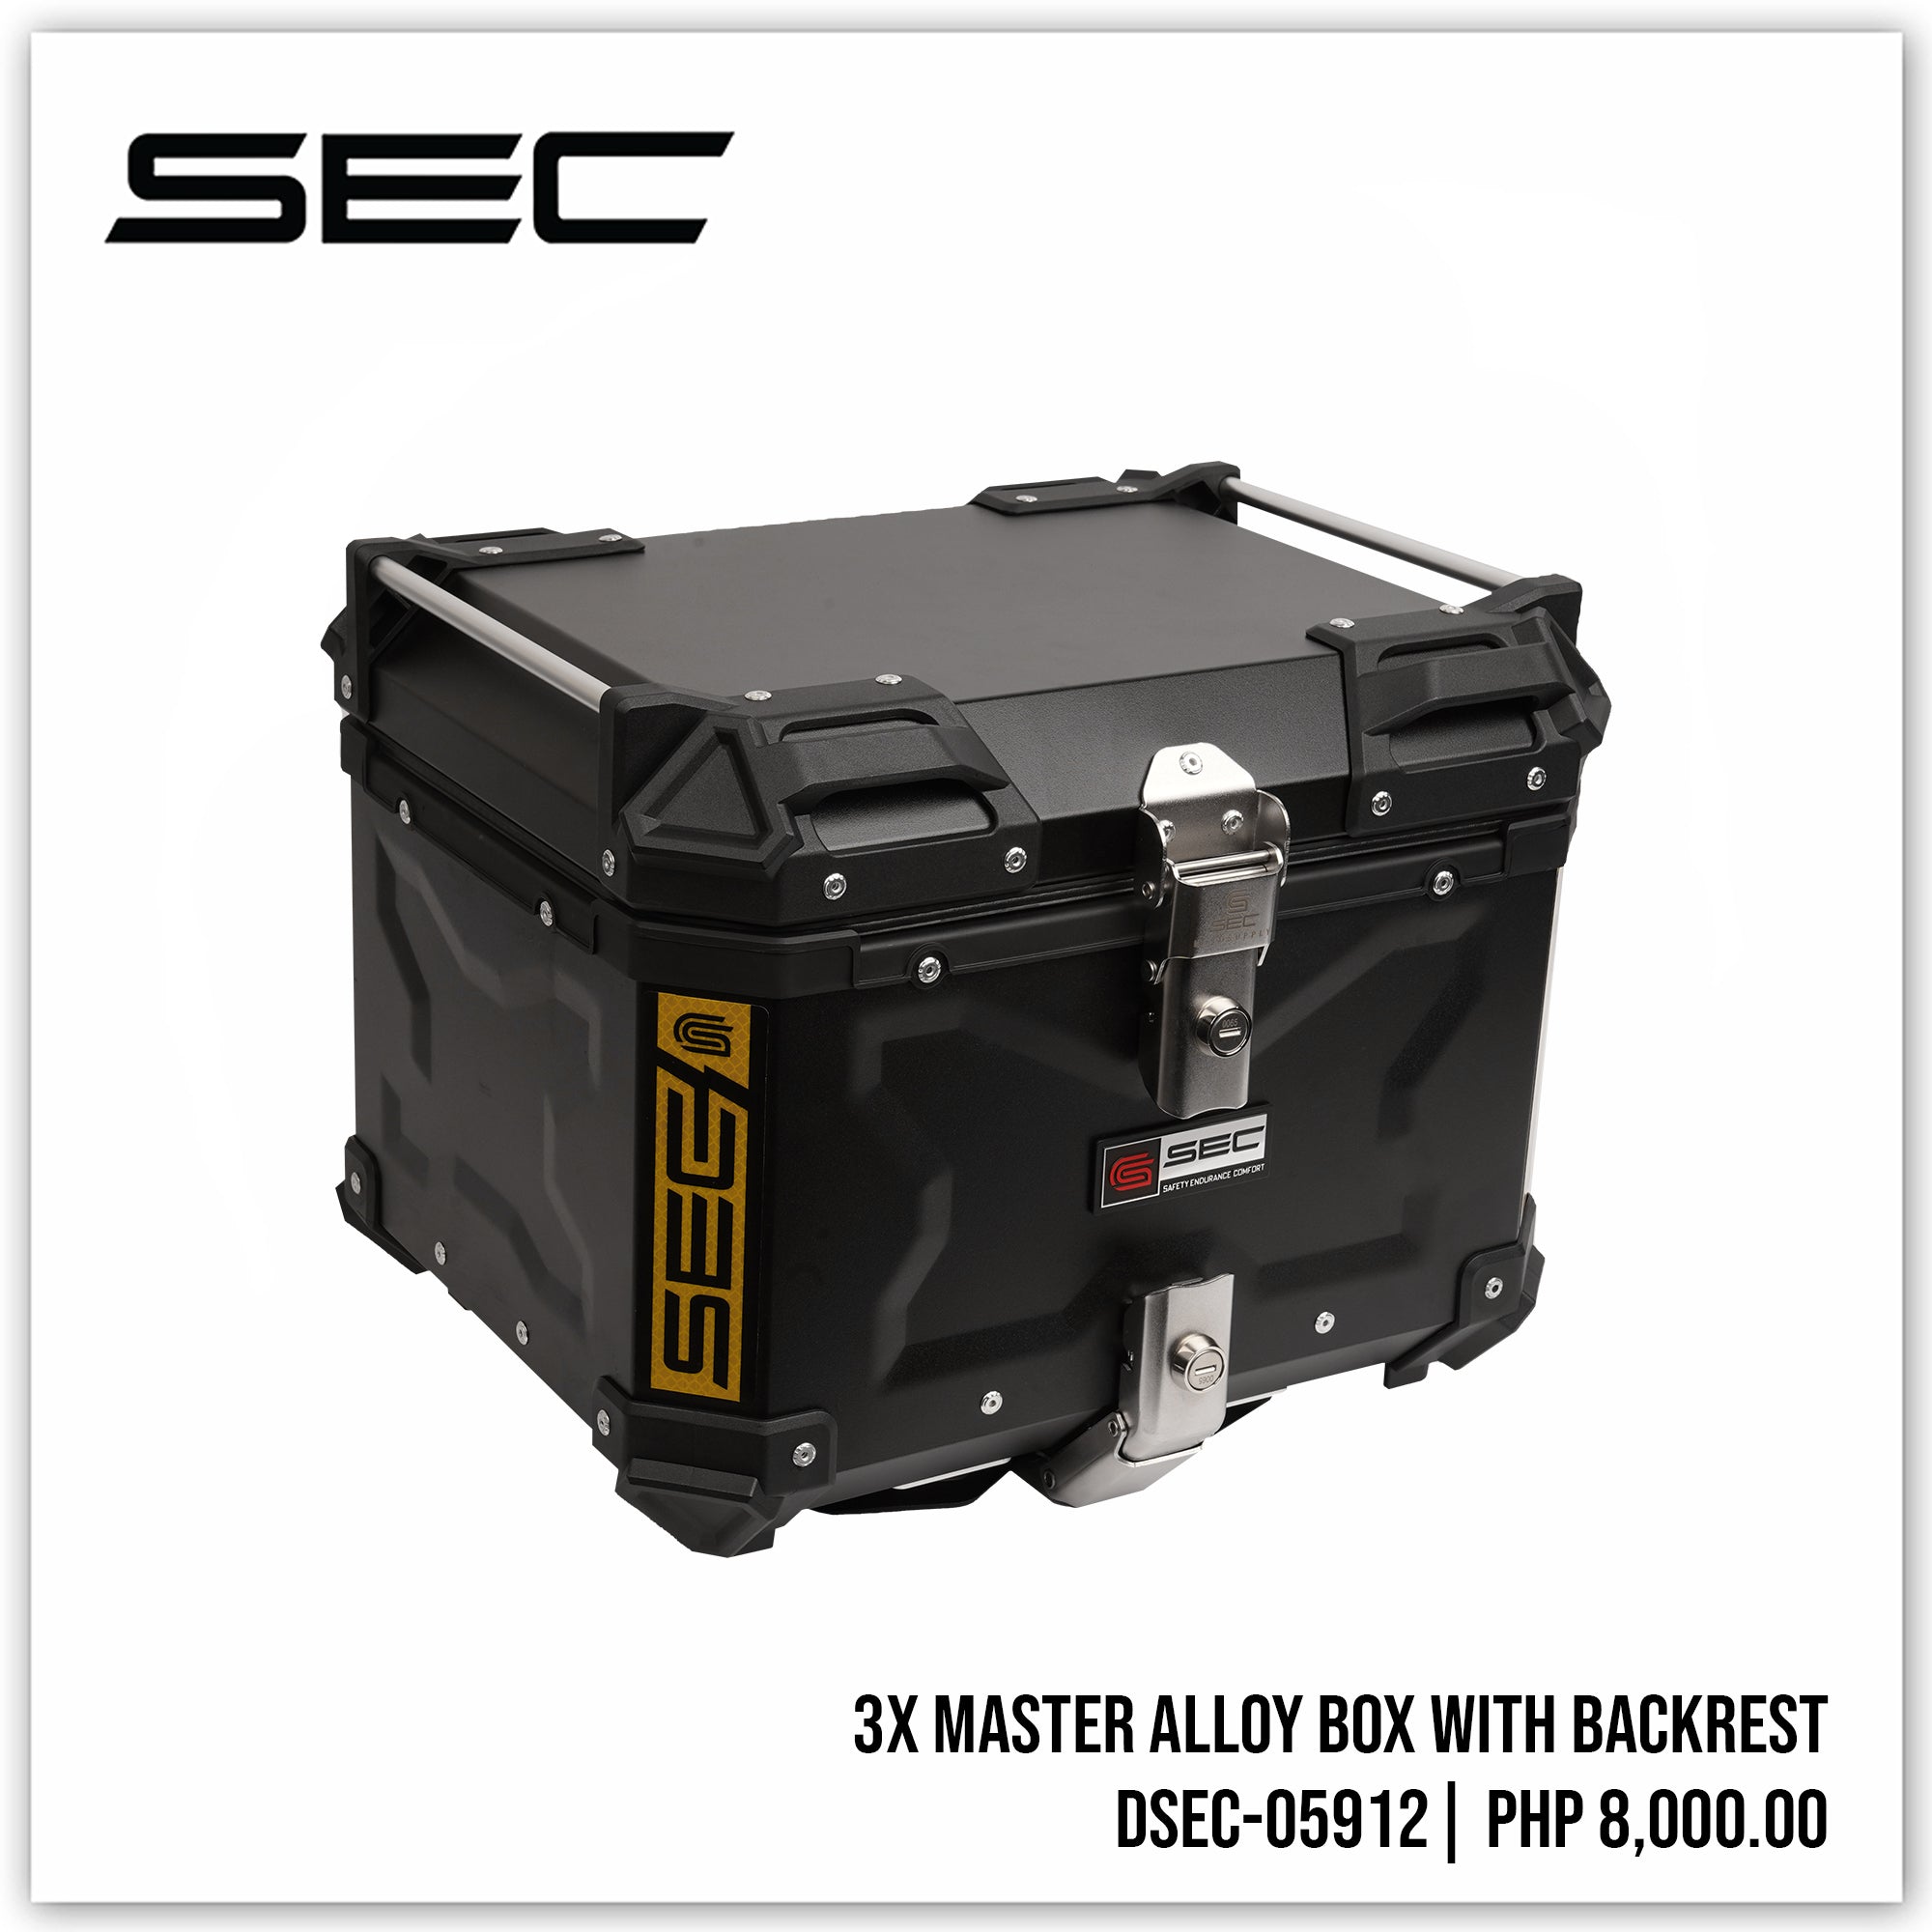 45L - (WITH BACKREST) 3x Master Alloy Box